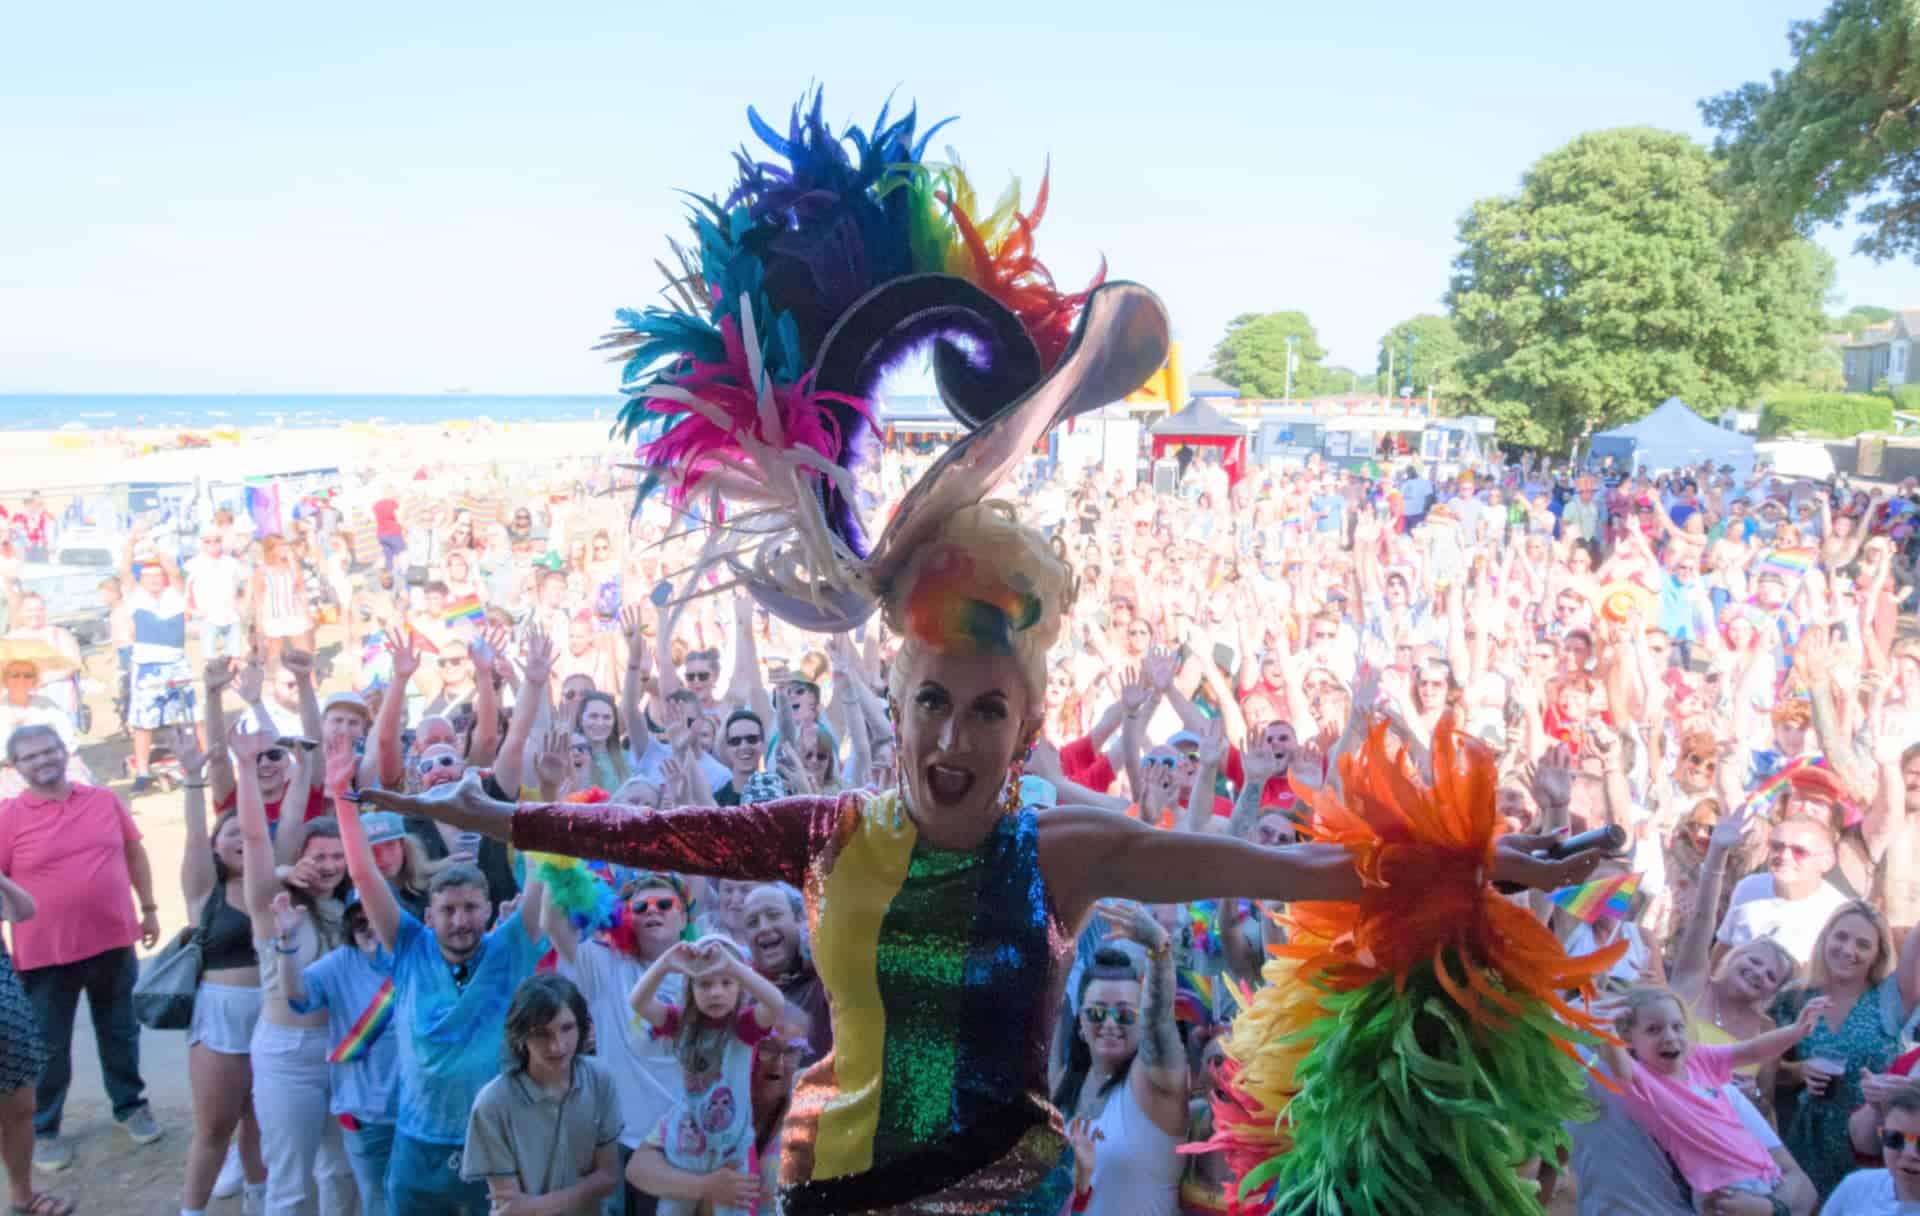 Drag Queen Cherry Liquor on stage at Isle of Wight Pride 2022